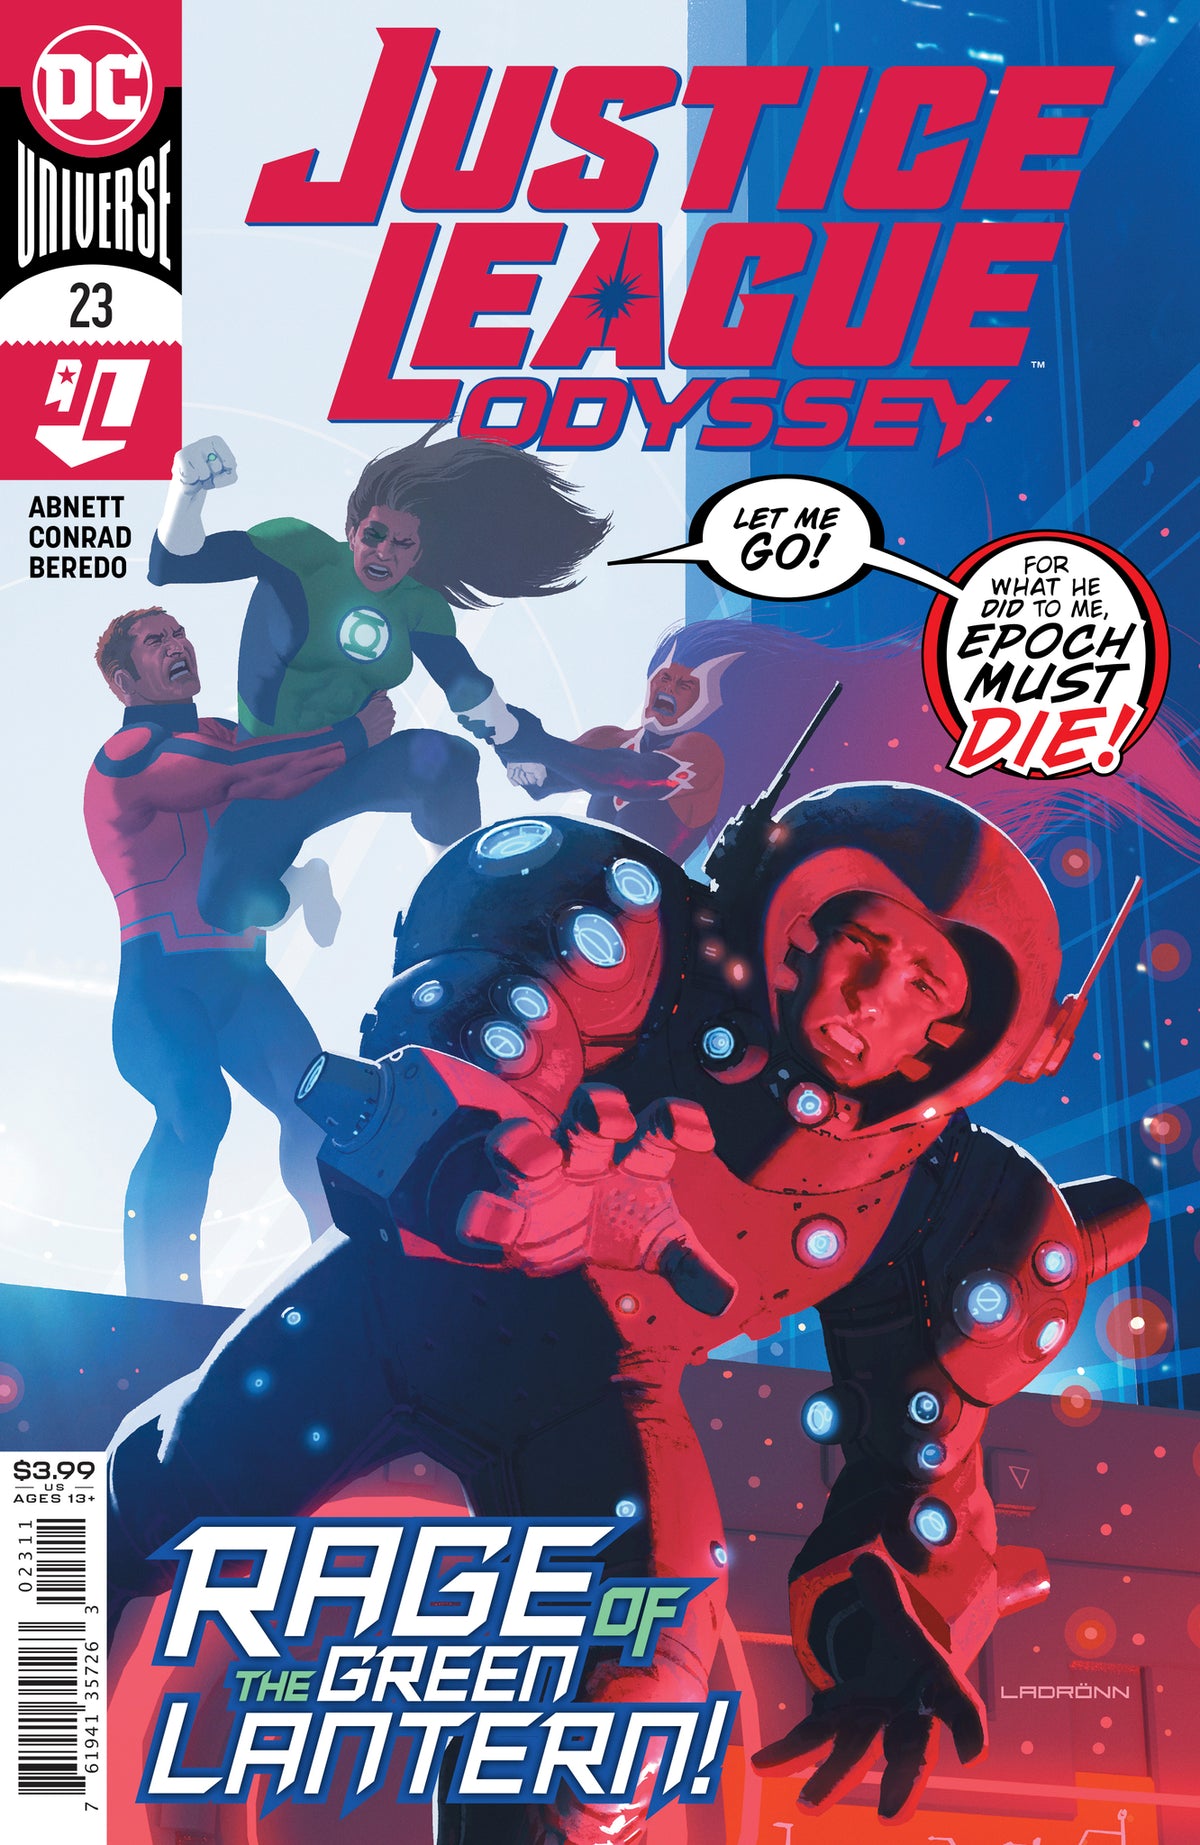 Justice League Odyssey #23 - State of Comics